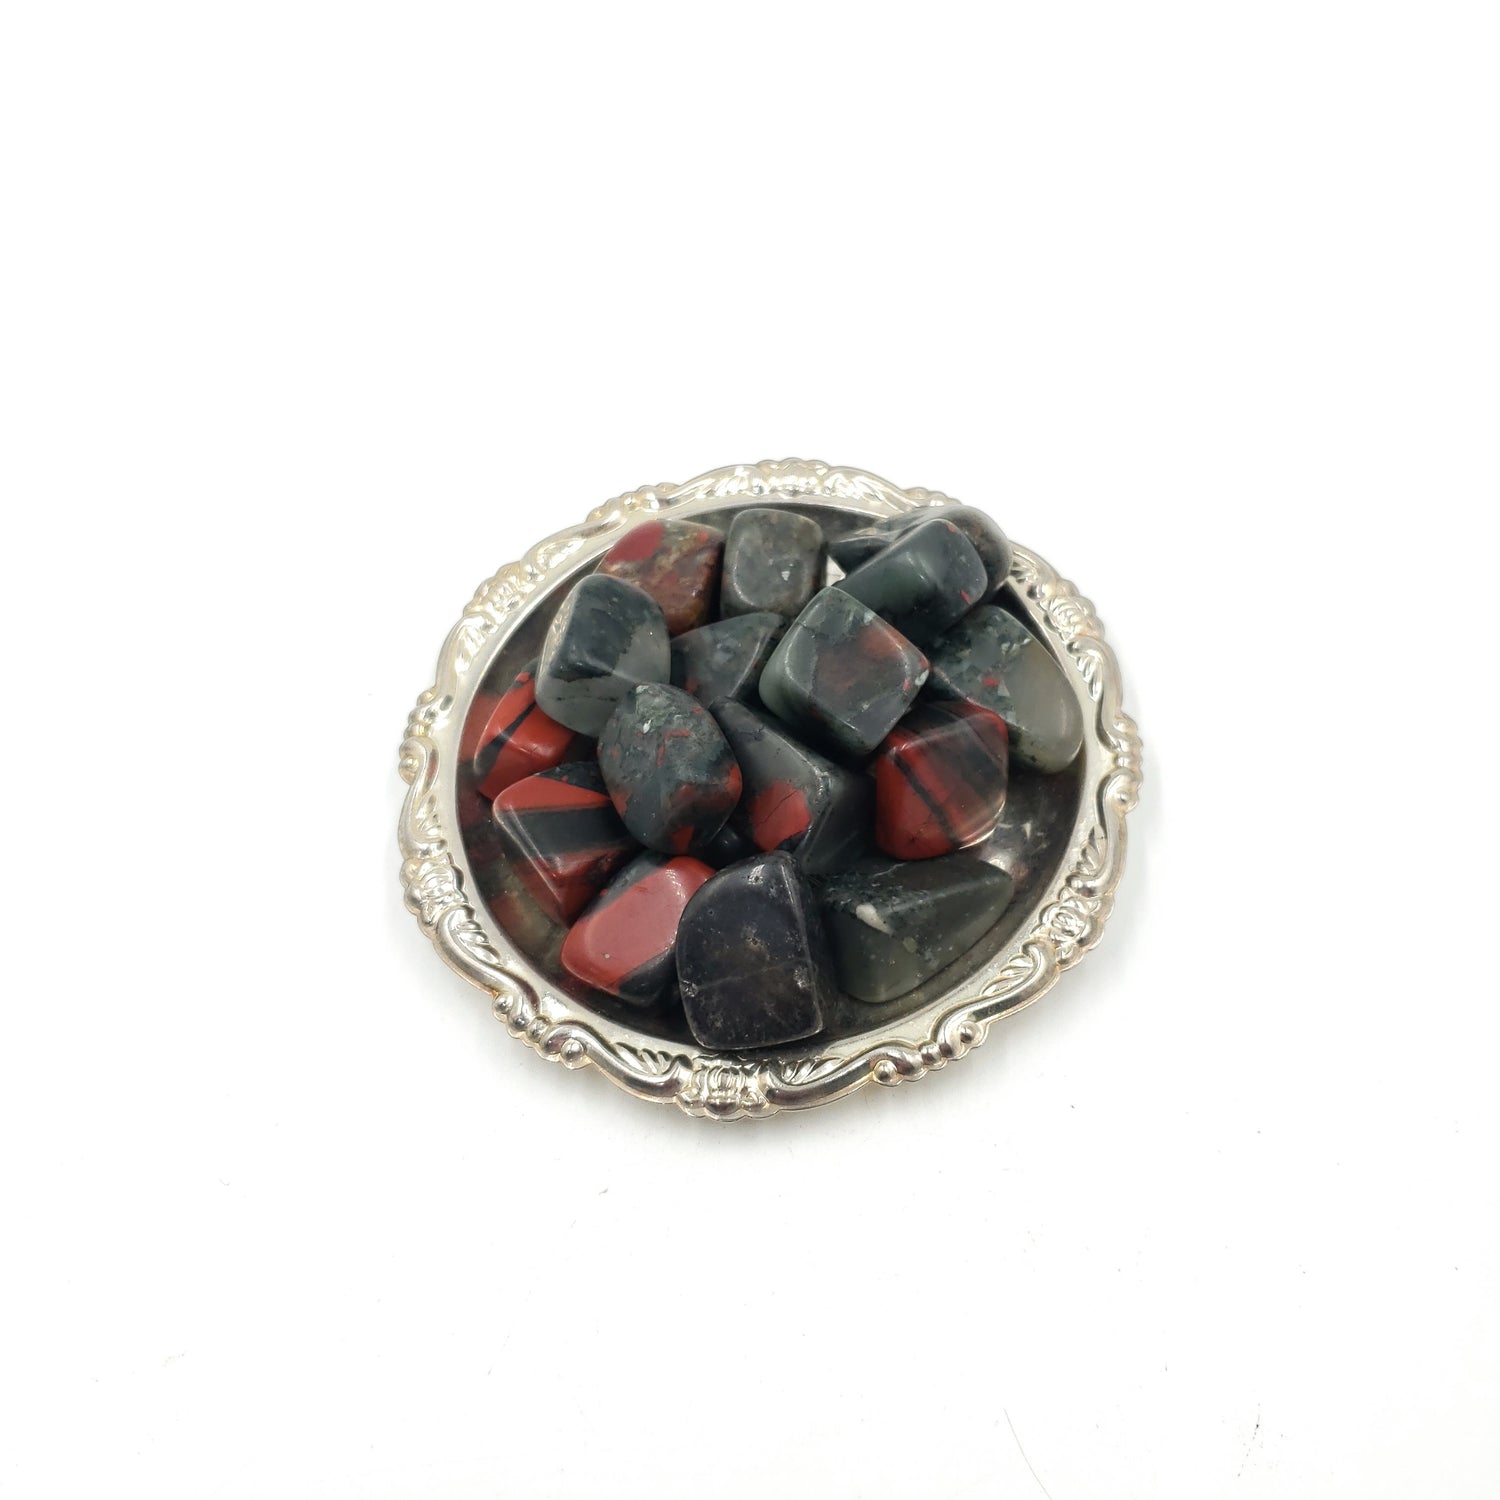 African Bloodstone Tumbled Stone - Elevated Metaphysical